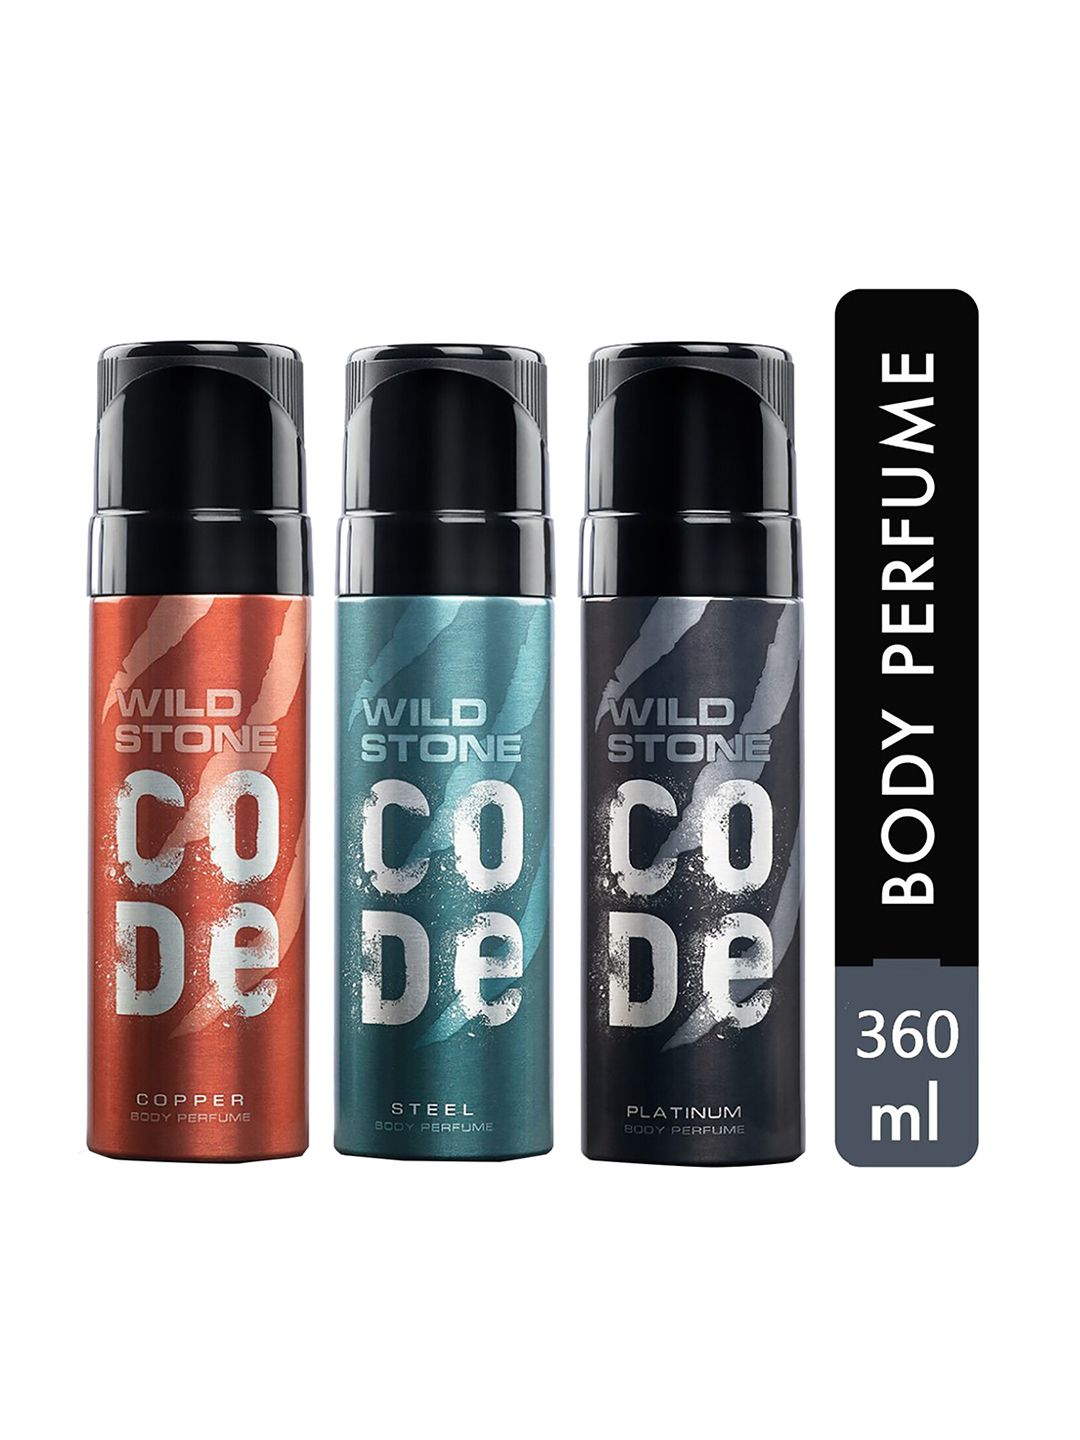 Wild Stone Code Copper, Platinum and Steel Body Perfume Spray for Men 120ml (Pack of 3) Price in India